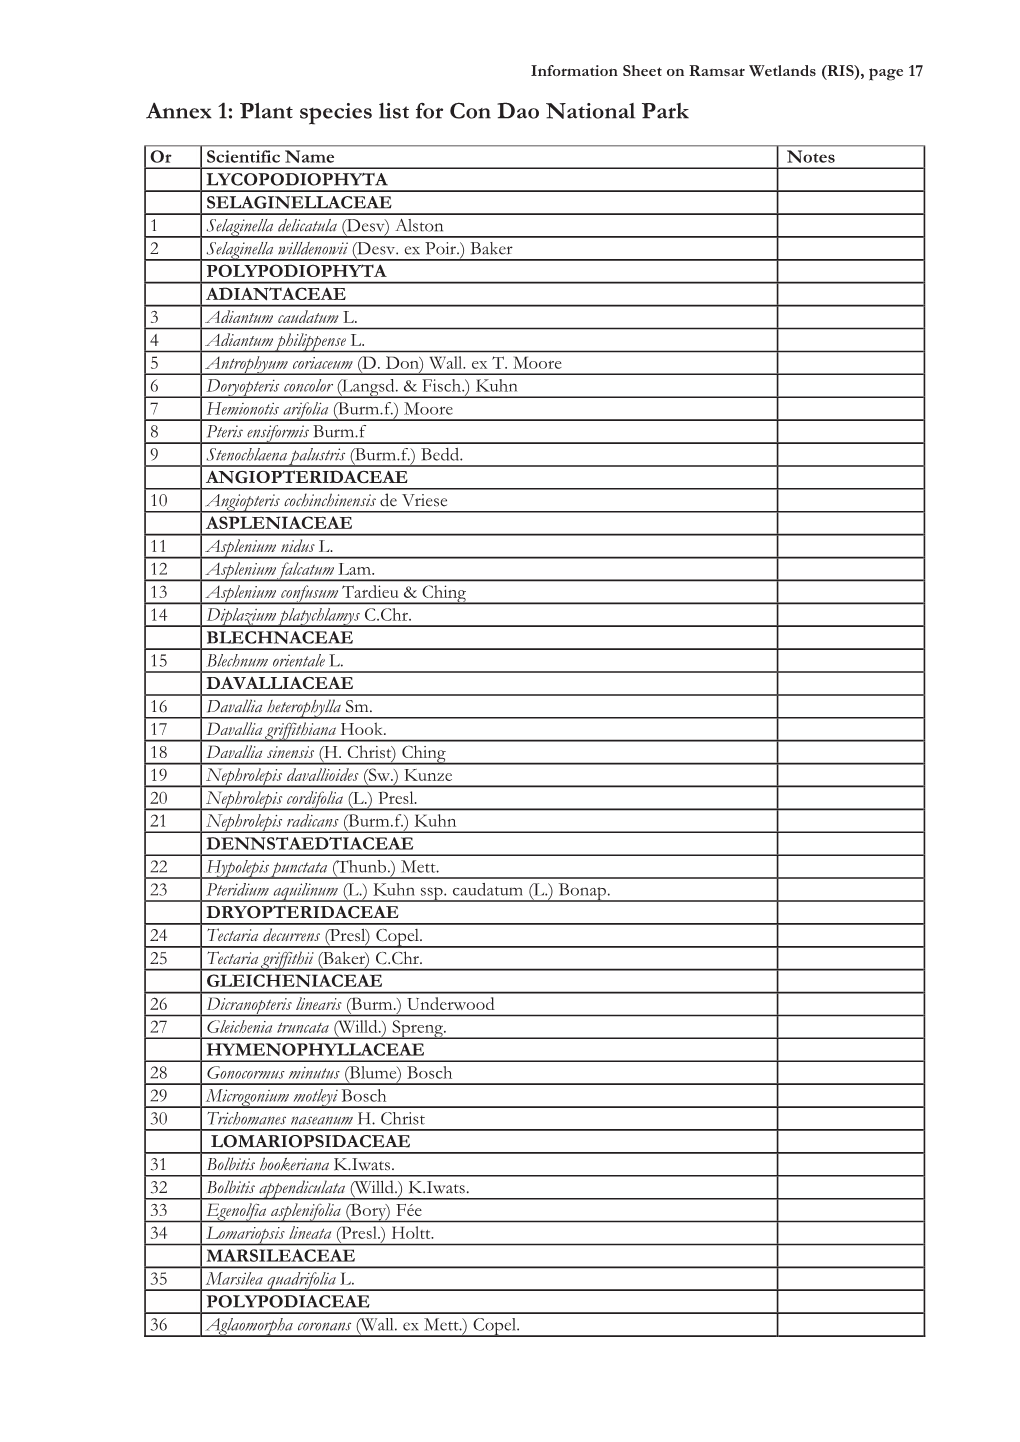 Information Sheet on Ramsar Wetlands (RIS), Page 17 Annex 1: Plant Species List for Con Dao National Park